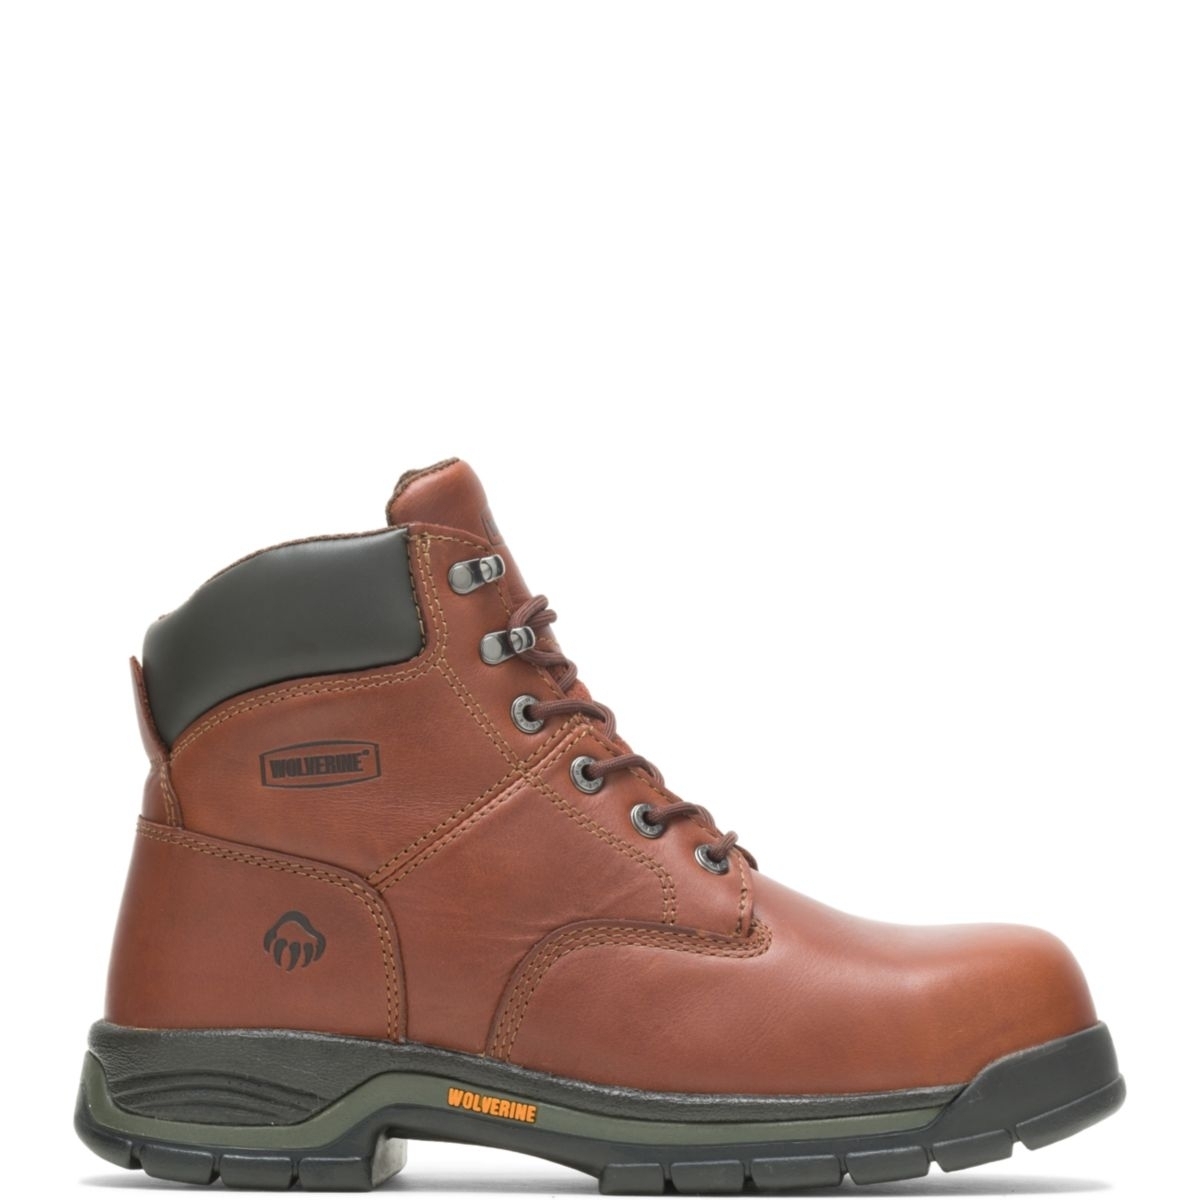 WOLVERINE Men's Harrison 6 Lace-Up SoftToe Work Boot Brown - W04906 Varies BROWN - BROWN, 9 X-Wide